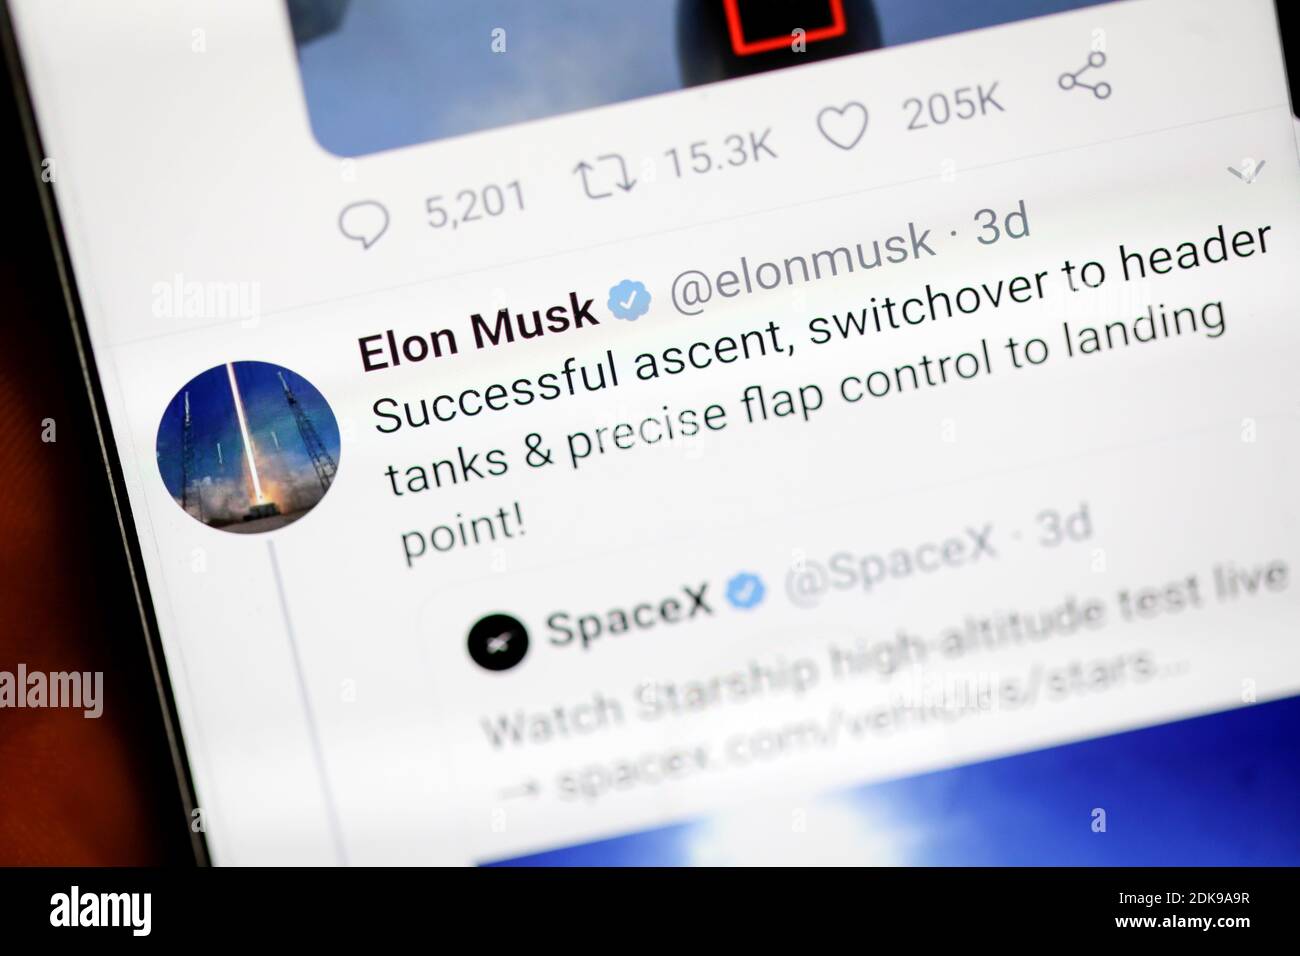 Bucharest, Romania - December 13, 2020: Details with the Twitter account of Elon Musk on a mobile device screen. Stock Photo